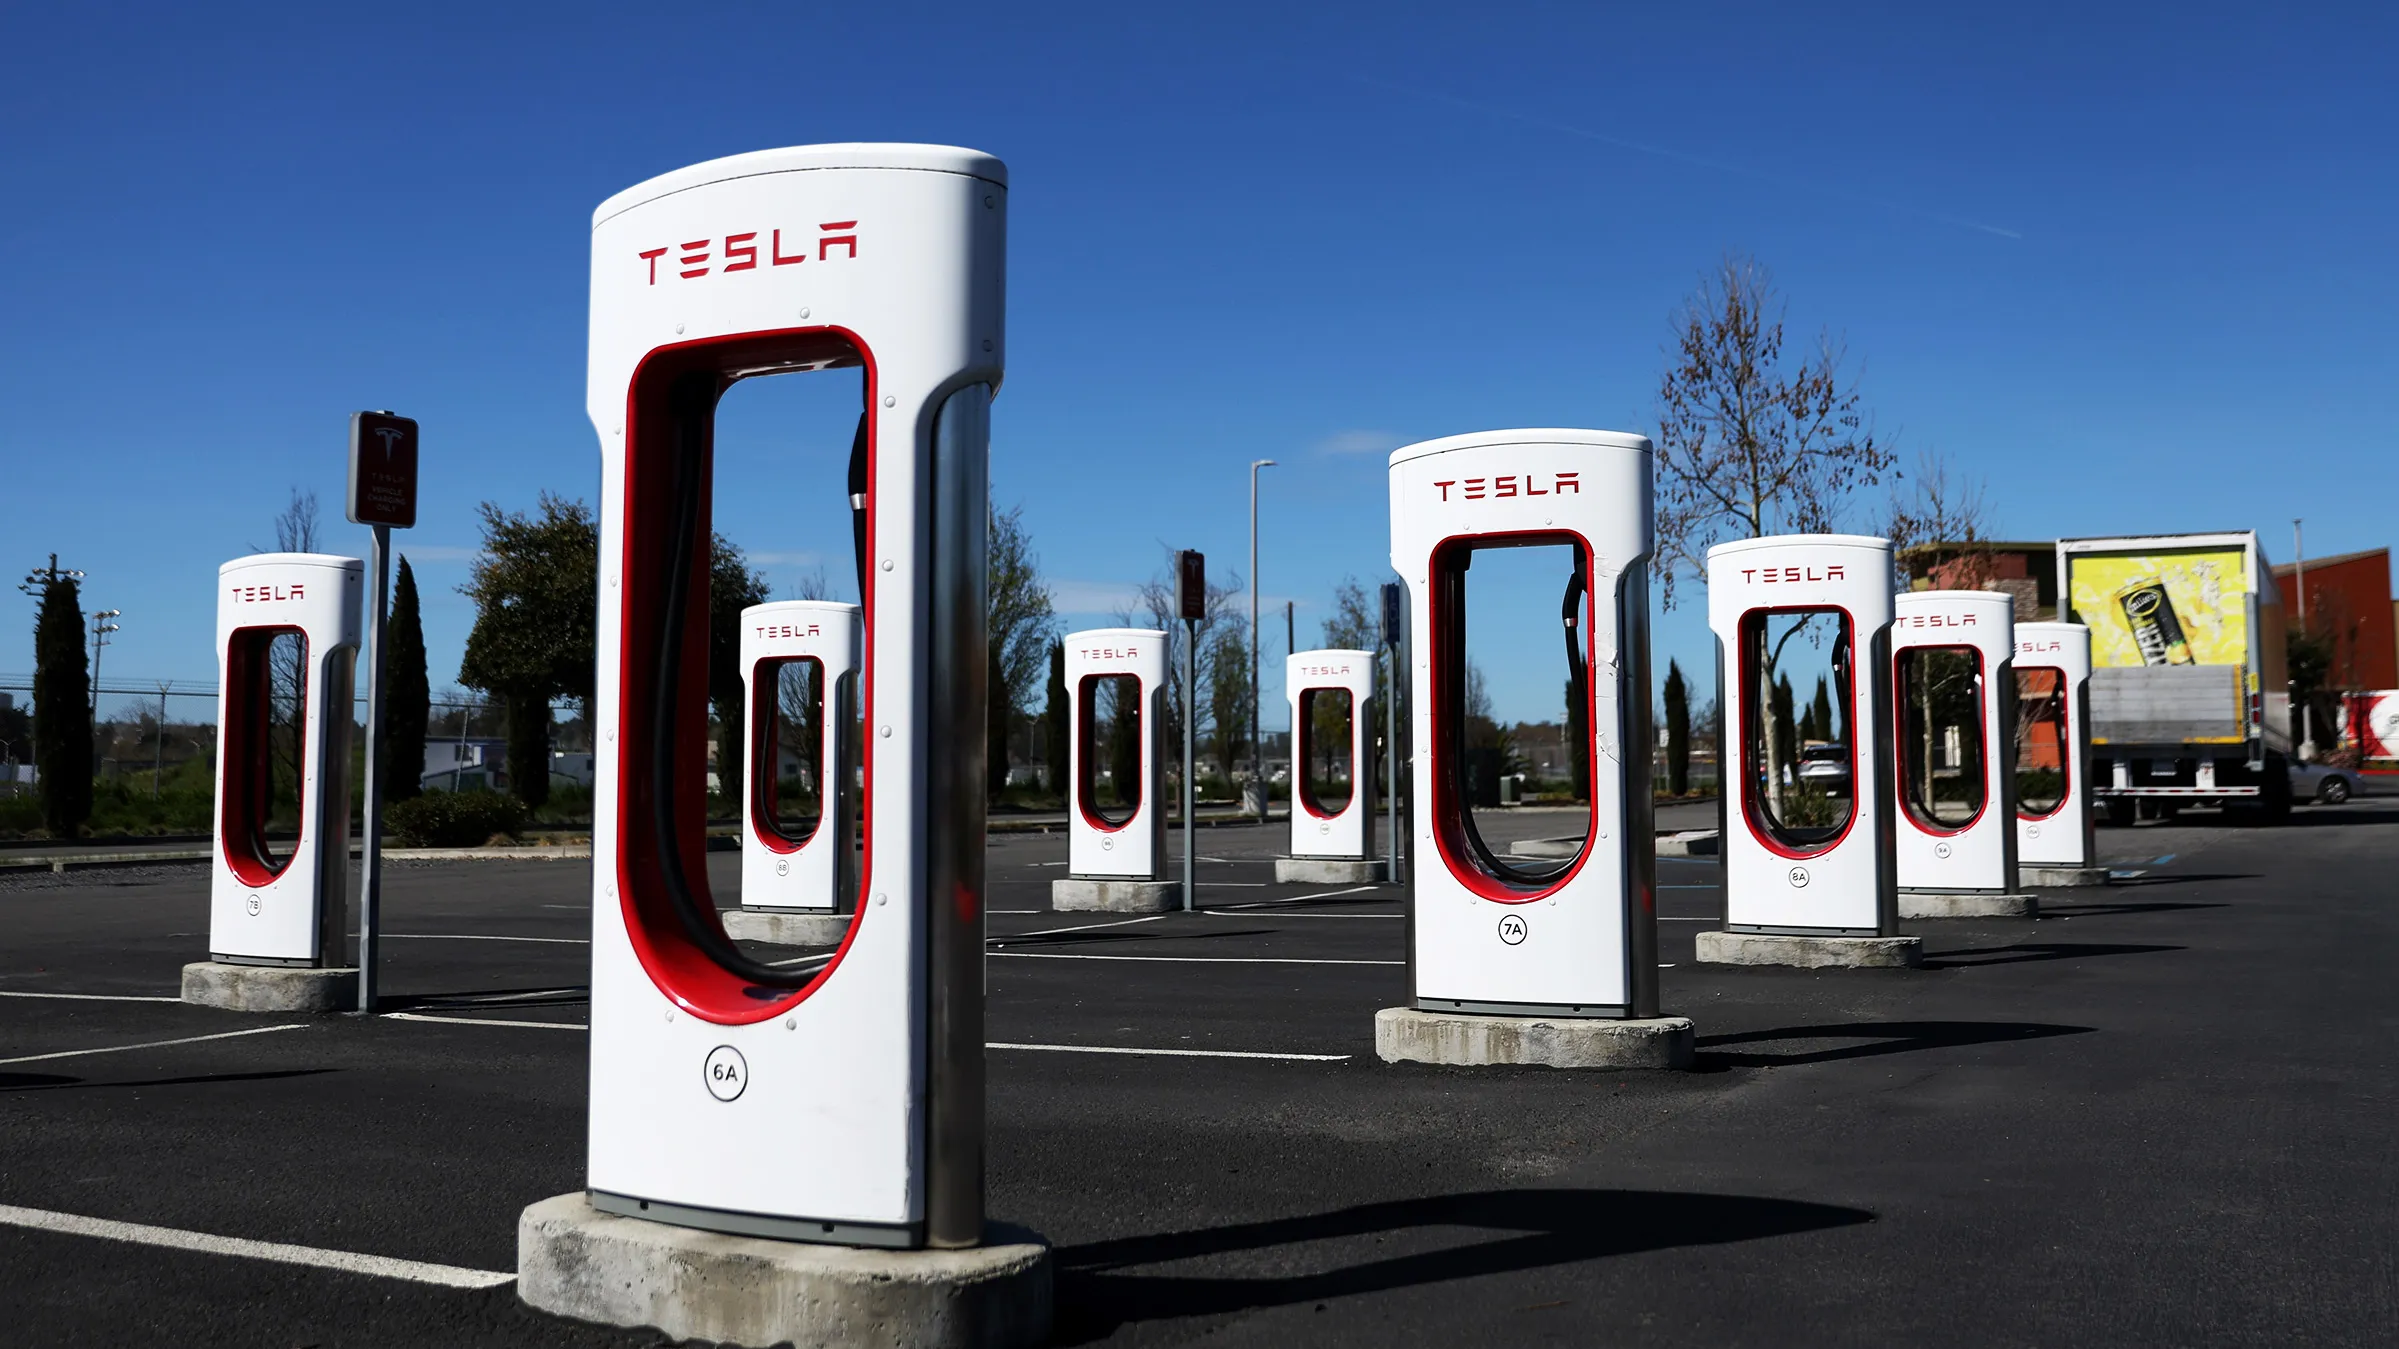 Non-Tesla EV Owners May Face Delays in Gaining Supercharger Access